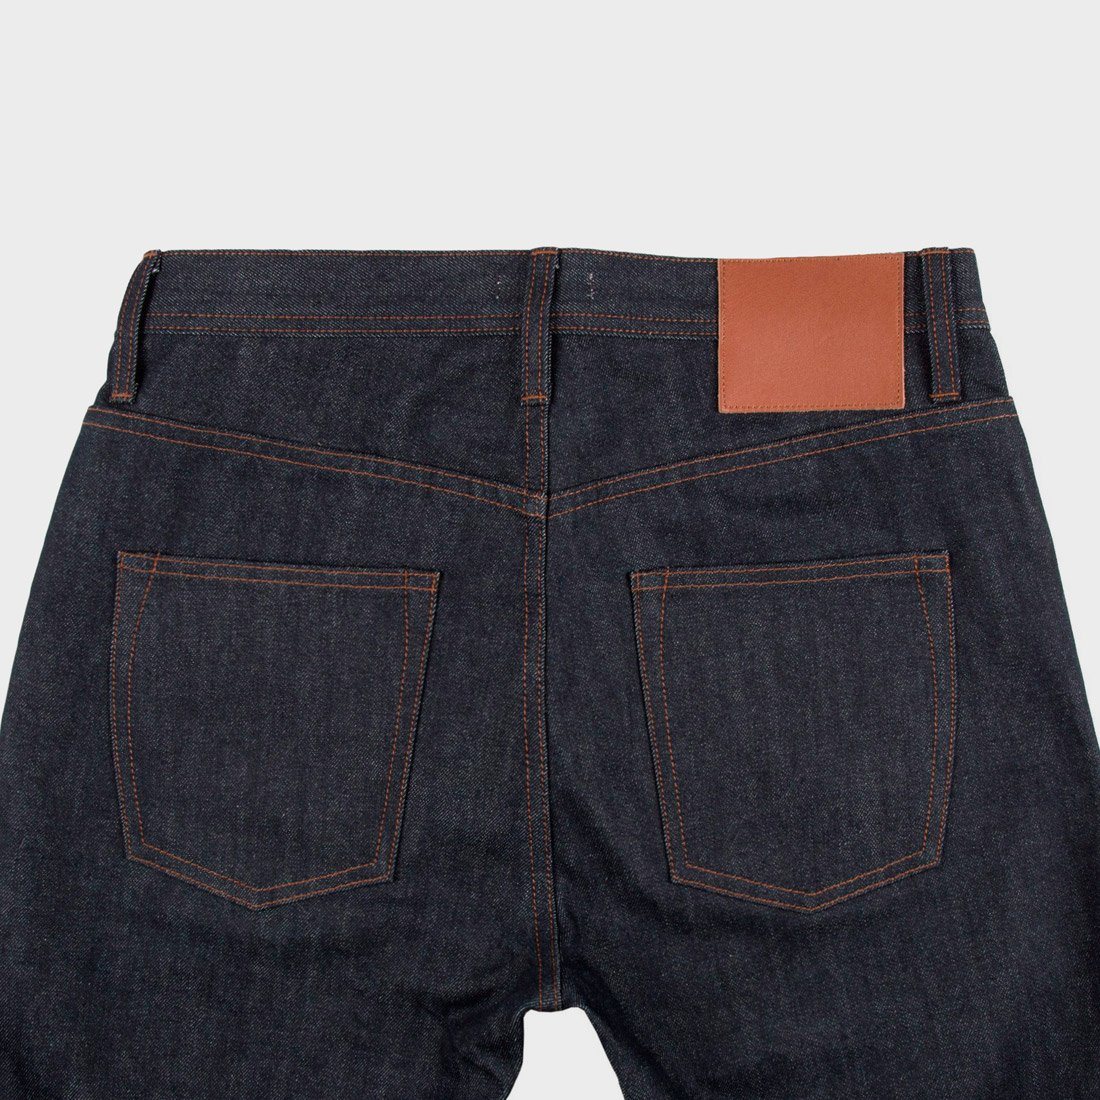 unbranded brand relaxed tapered